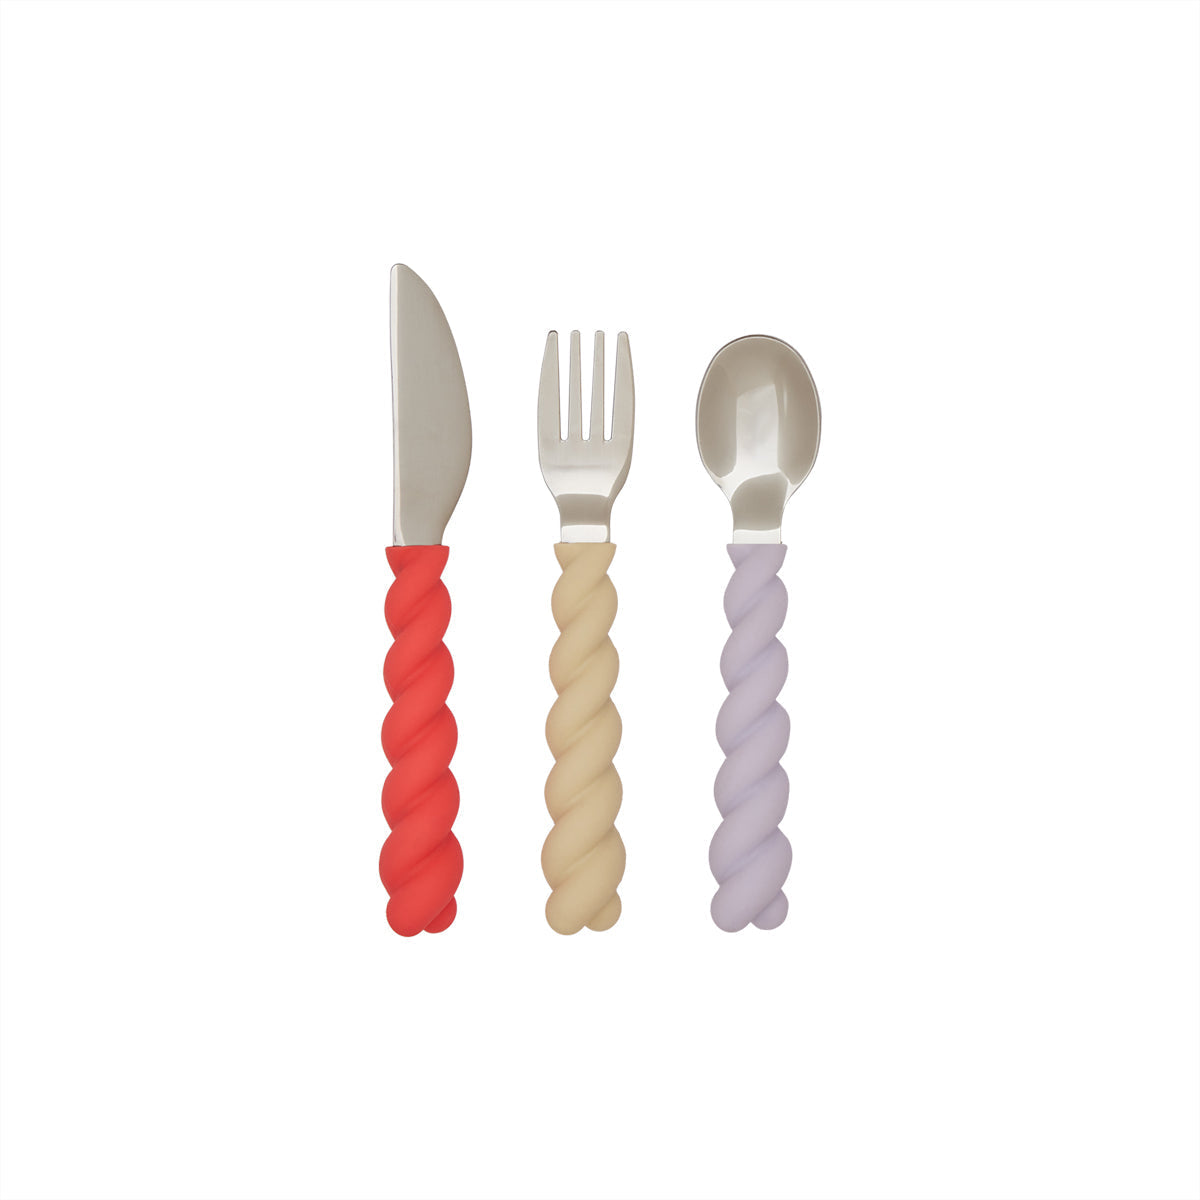 OYOY MINI Mellow Cutlery - Pack of 3 Dining Ware